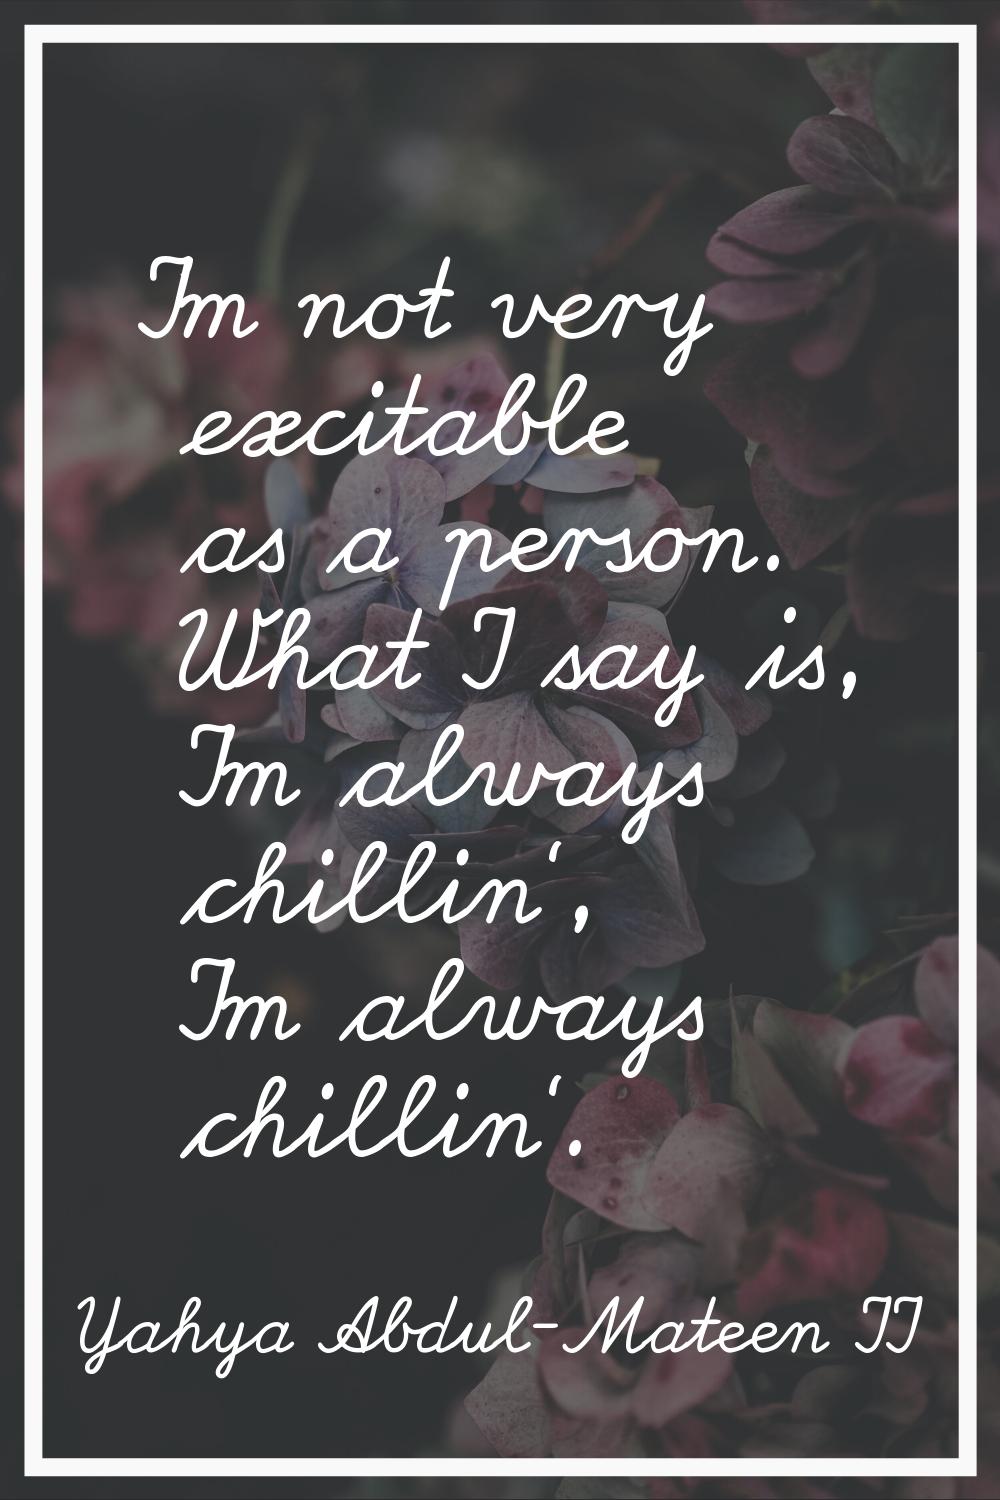 I'm not very excitable as a person. What I say is, I'm always chillin', I'm always chillin'.